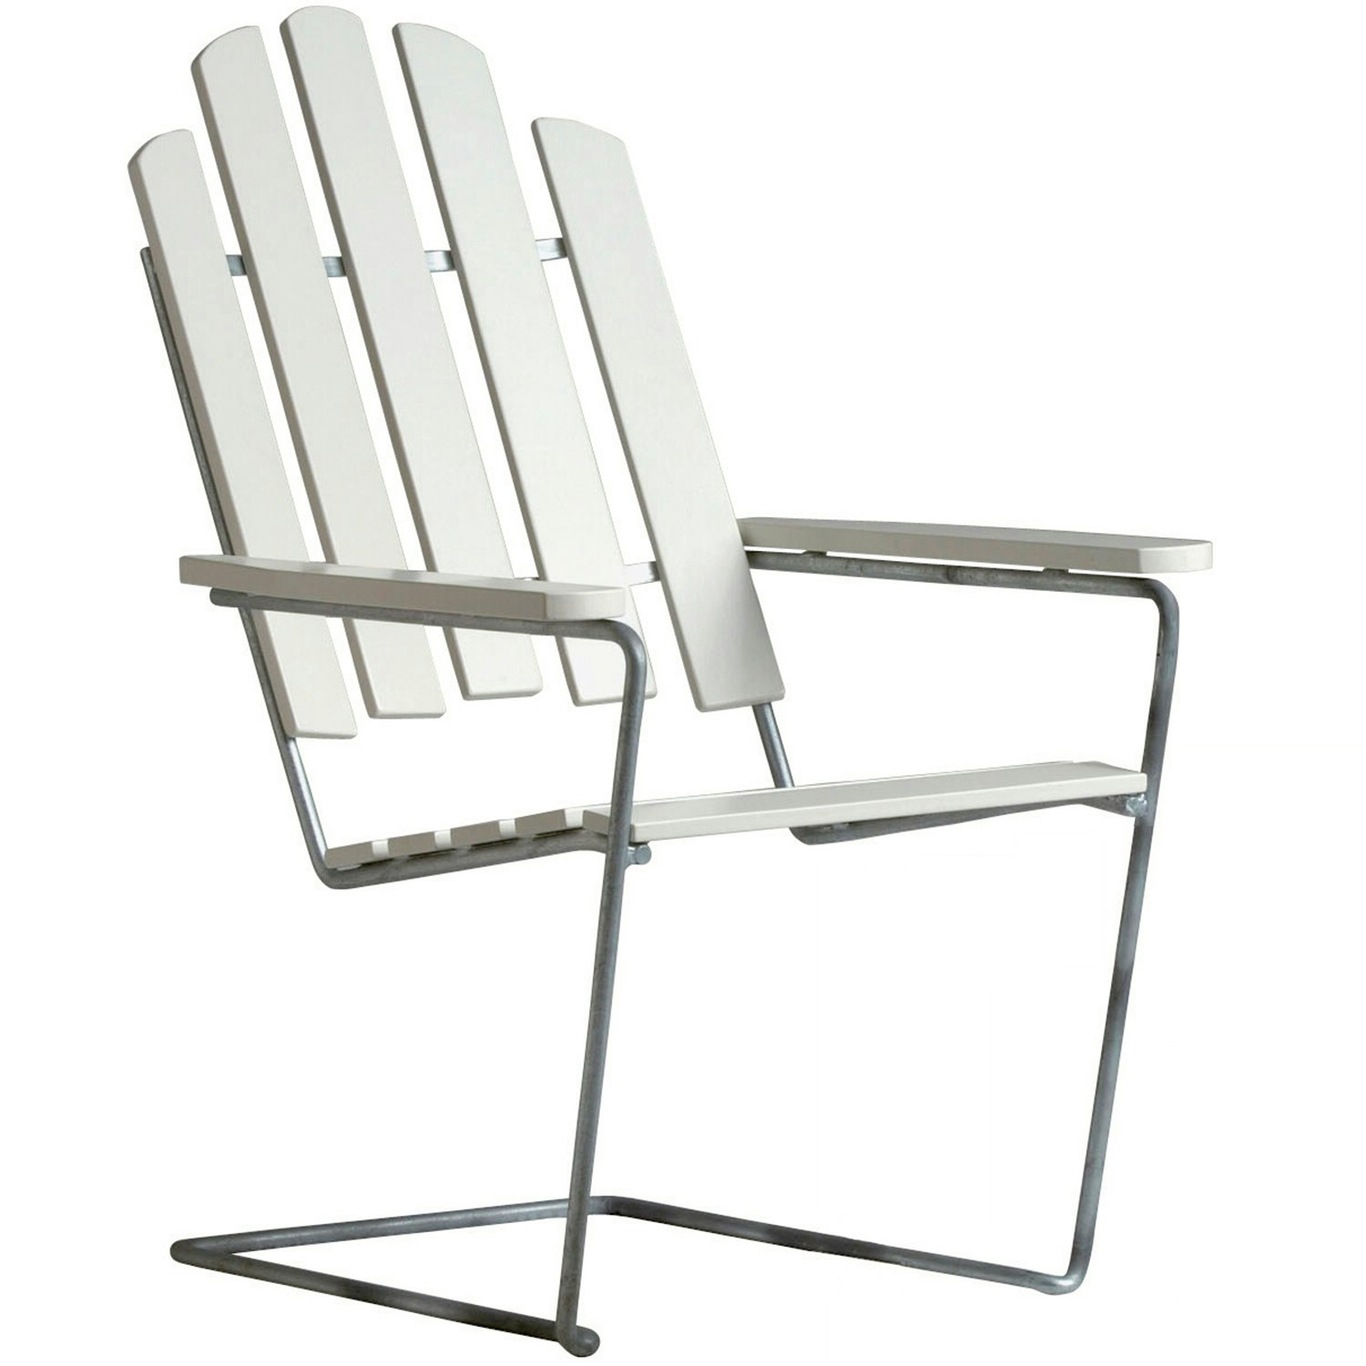 Lounger A3, White Lacquered Oak / Hot Galvanized Steel